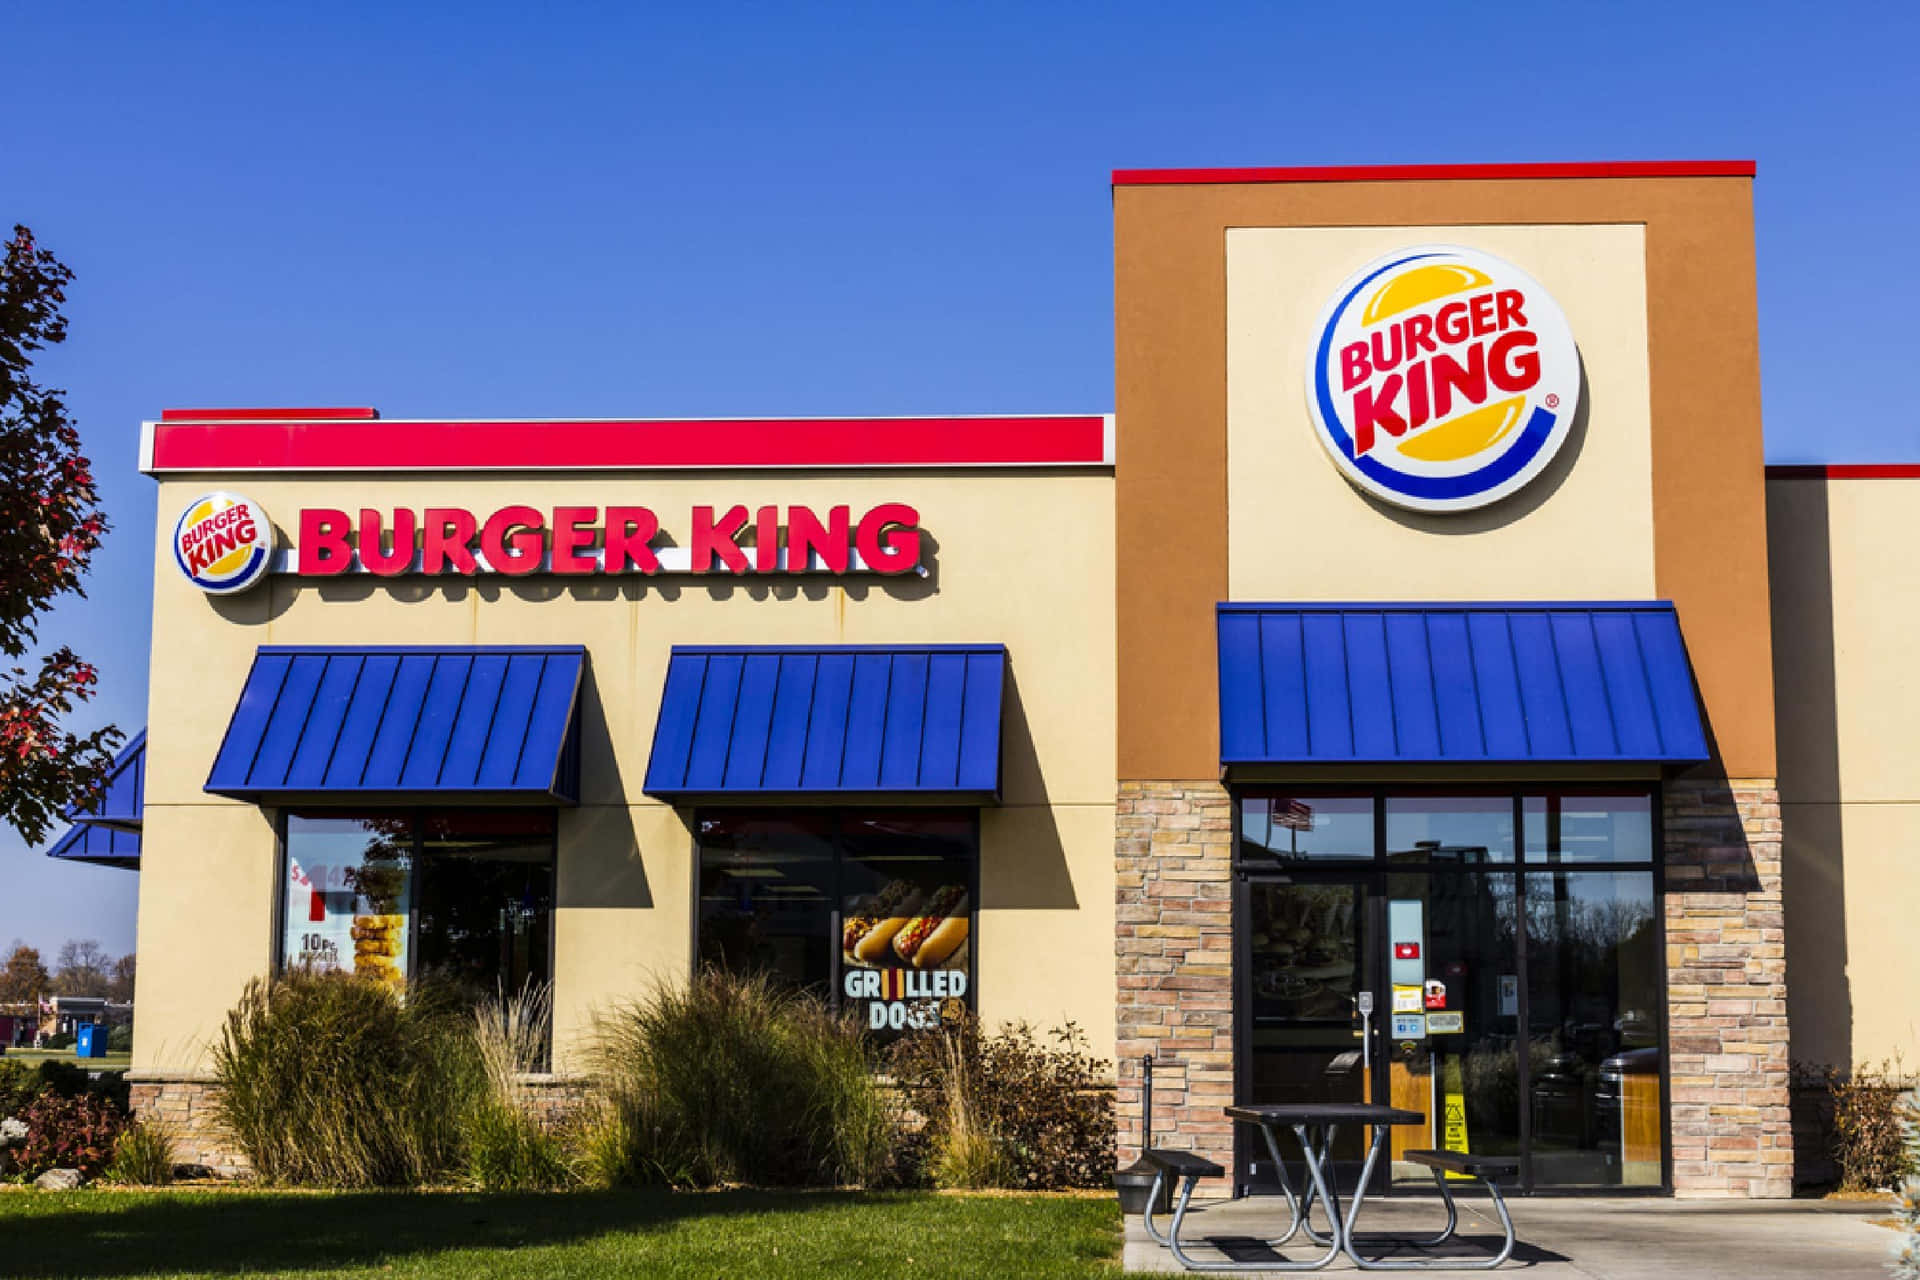 Burger King In A Grassy Area